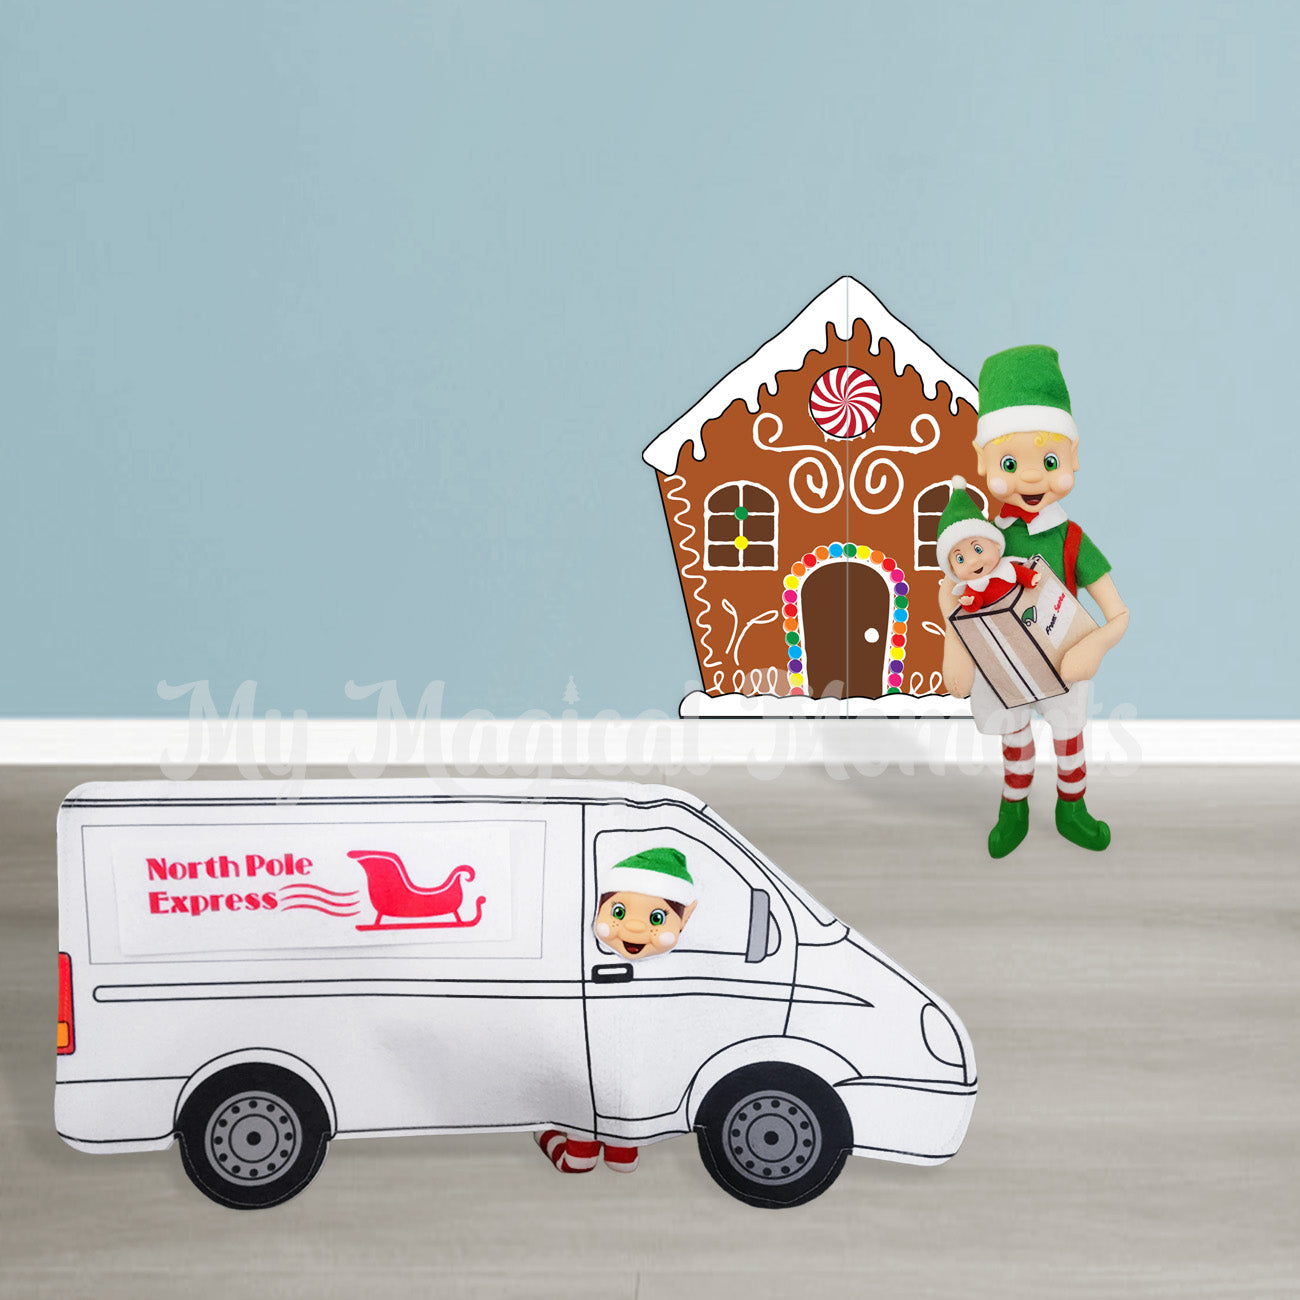 Elf delivering a baby parcel to a gingerbread house and delivery van costume